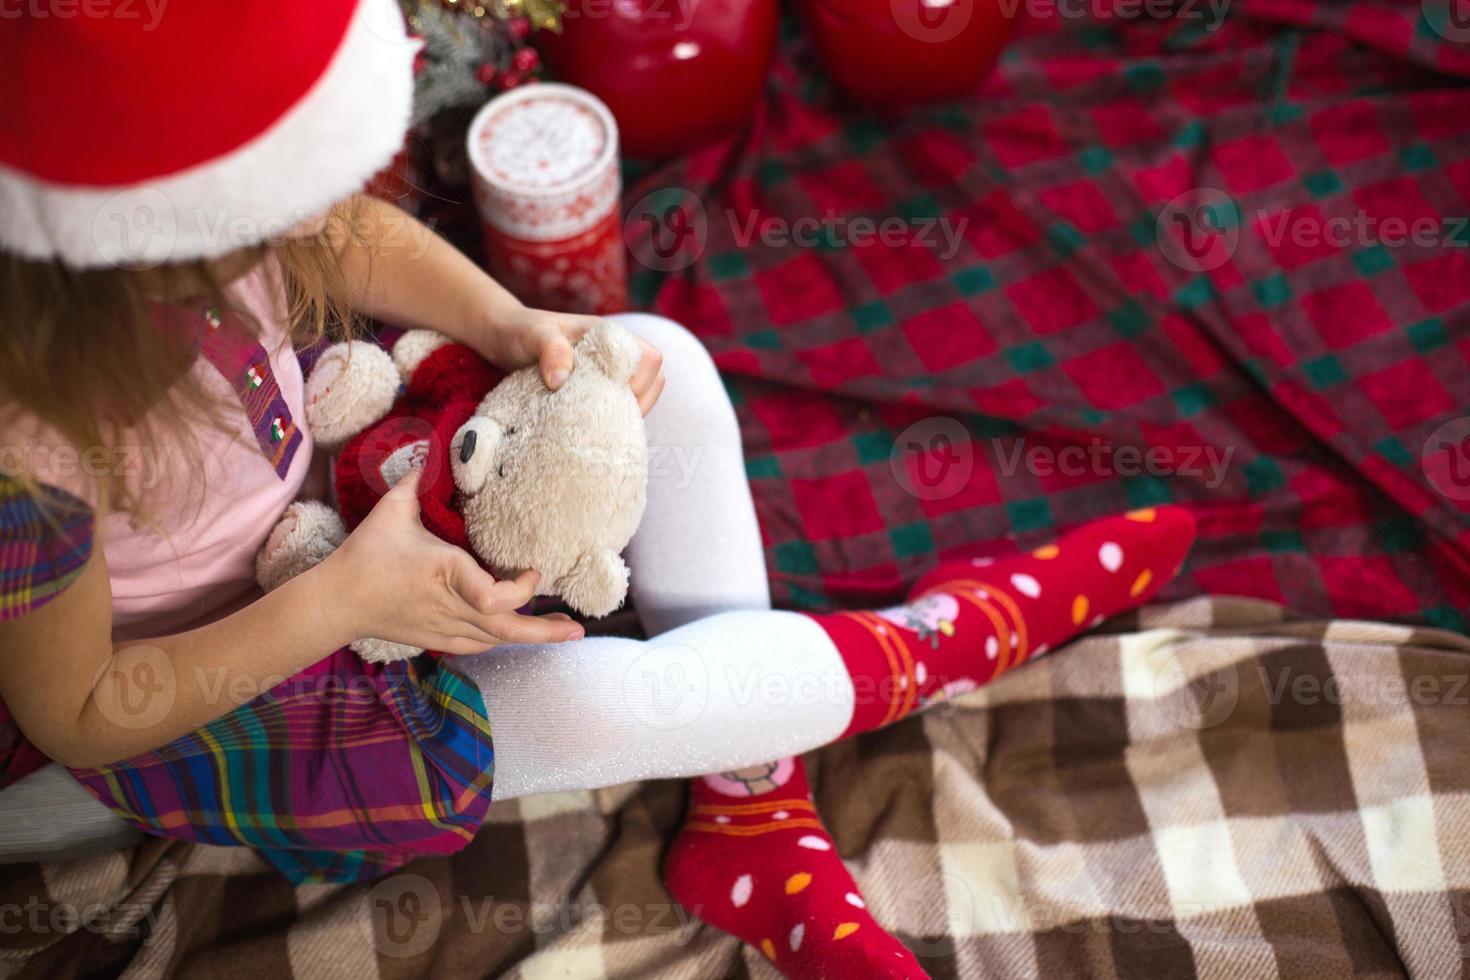 A little girl holding a Teddy bear, sitting on a plaid blanket in the Christmas decorations near a Christmas tree with boxes of gifts and a Santa hat. New year, children's game photo